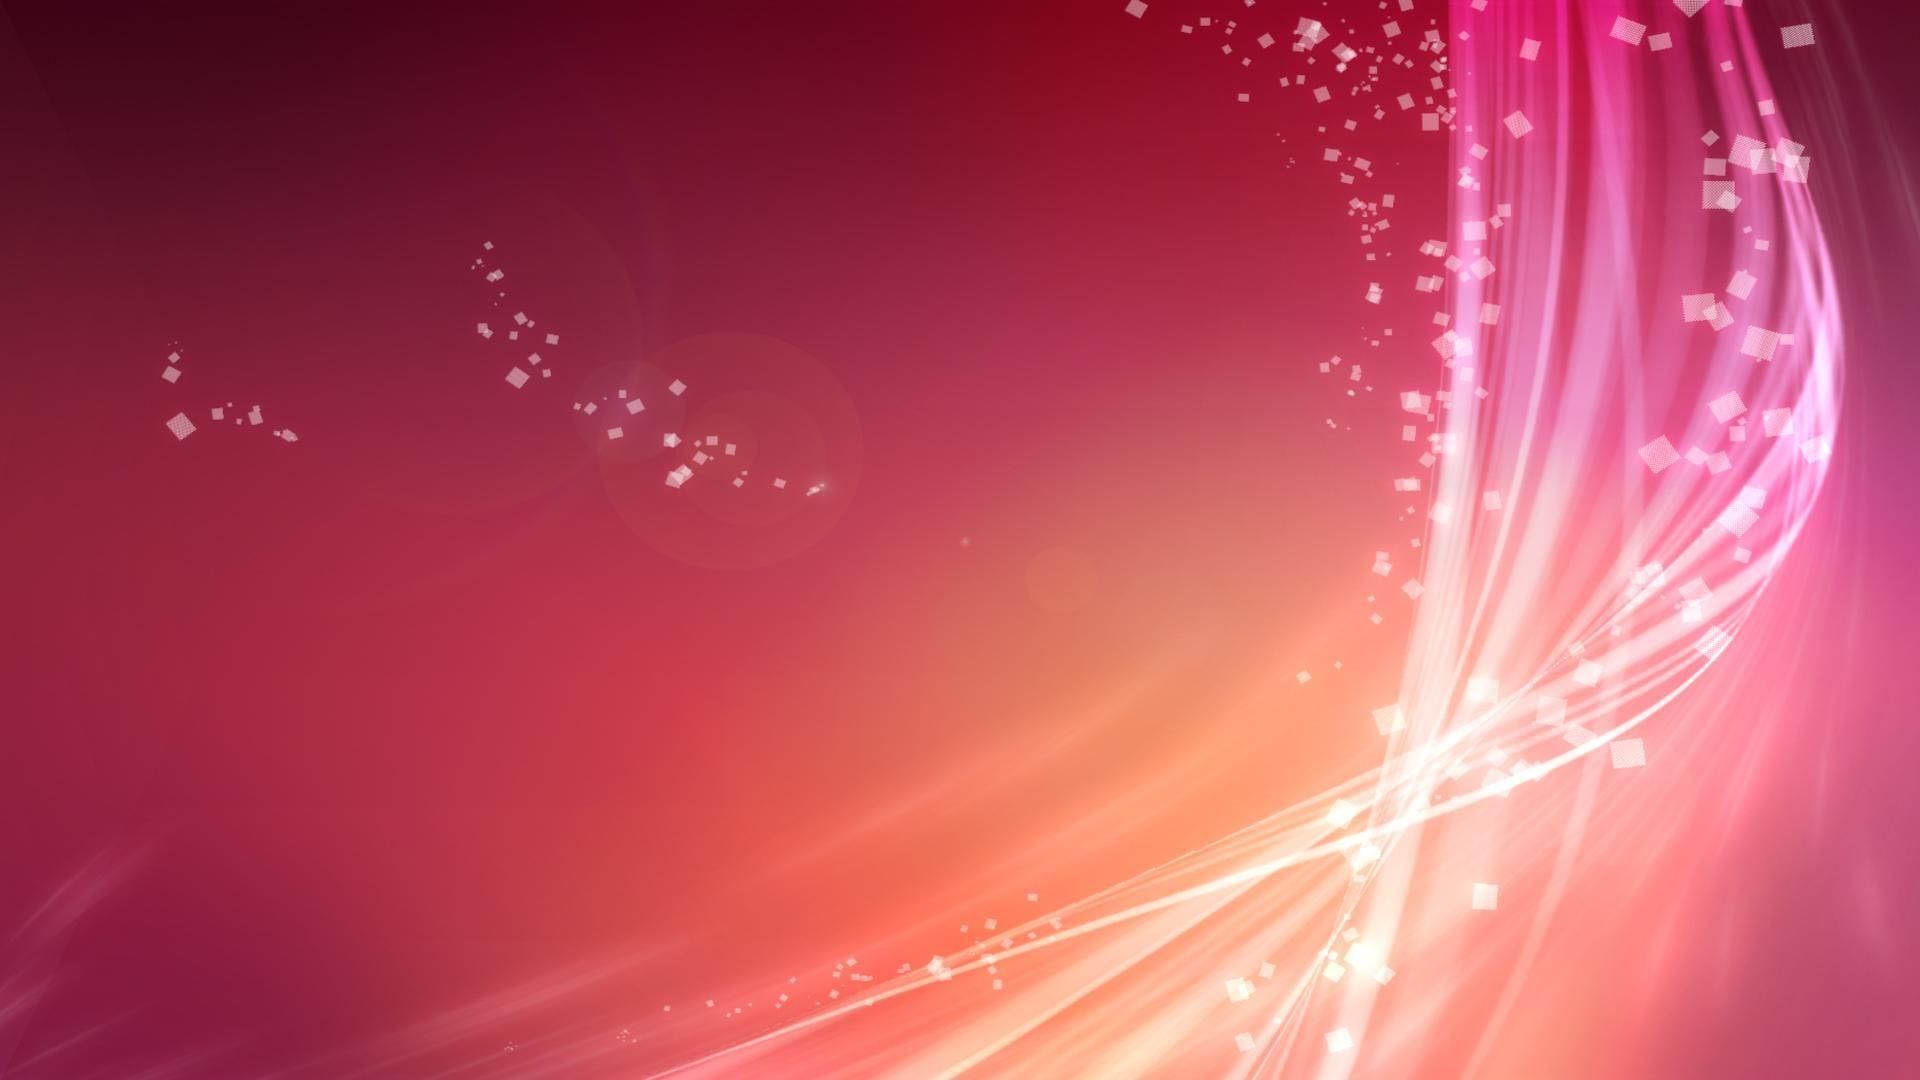 Light reddish and pinkish abstract fire free desktop background ...